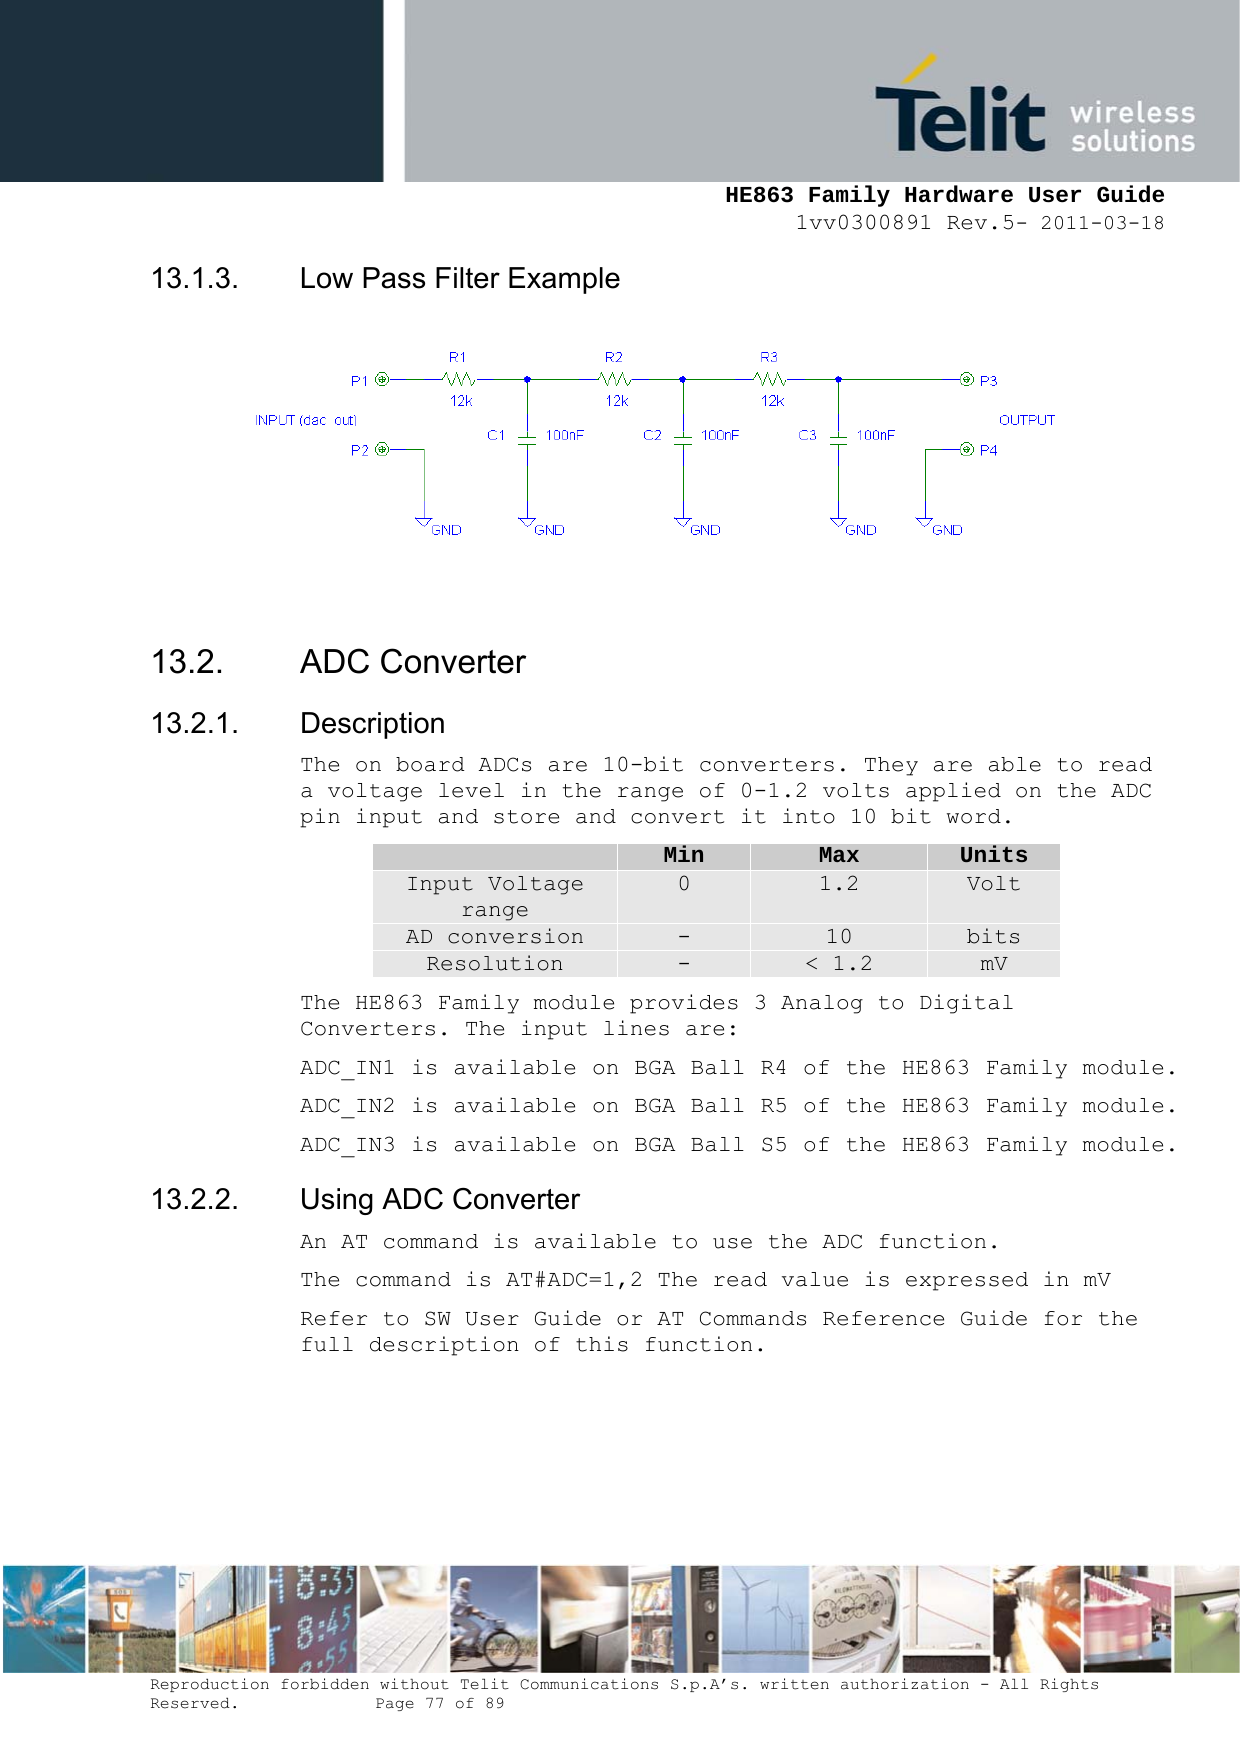     HE863 Family Hardware User Guide 1vv0300891 Rev.5- 2011-03-18    Reproduction forbidden without Telit Communications S.p.A’s. written authorization - All Rights Reserved.    Page 77 of 89  13.1.3.  Low Pass Filter Example   13.2. ADC Converter 13.2.1. Description The on board ADCs are 10-bit converters. They are able to read a voltage level in the range of 0-1.2 volts applied on the ADC pin input and store and convert it into 10 bit word.  Min  Max  Units Input Voltage range 0  1.2  Volt AD conversion  -  10  bits Resolution  -  &lt; 1.2  mV The HE863 Family module provides 3 Analog to Digital Converters. The input lines are: ADC_IN1 is available on BGA Ball R4 of the HE863 Family module. ADC_IN2 is available on BGA Ball R5 of the HE863 Family module. ADC_IN3 is available on BGA Ball S5 of the HE863 Family module. 13.2.2.  Using ADC Converter An AT command is available to use the ADC function.  The command is AT#ADC=1,2 The read value is expressed in mV Refer to SW User Guide or AT Commands Reference Guide for the full description of this function.  